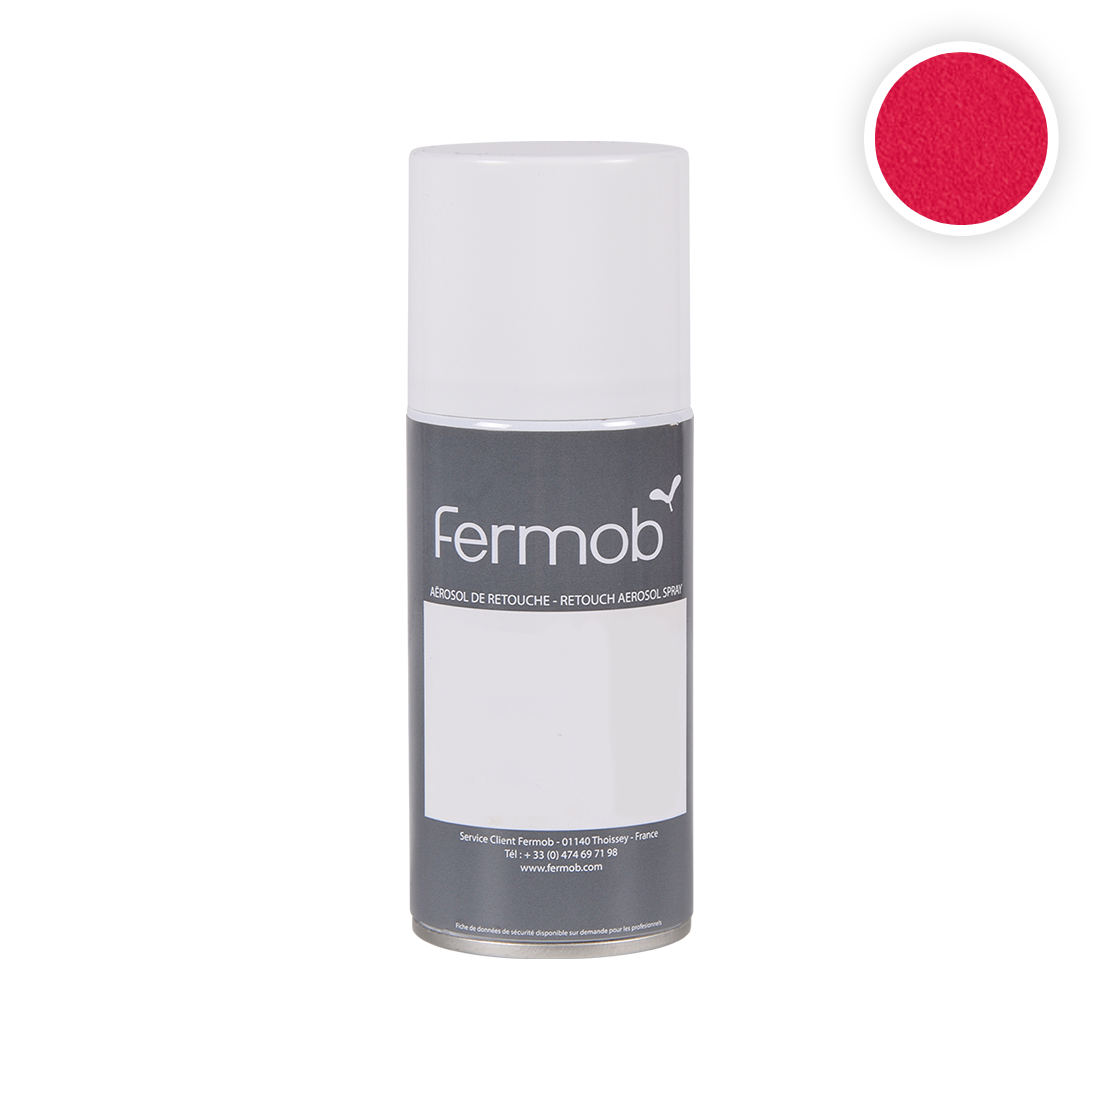 Fermob touch up paint